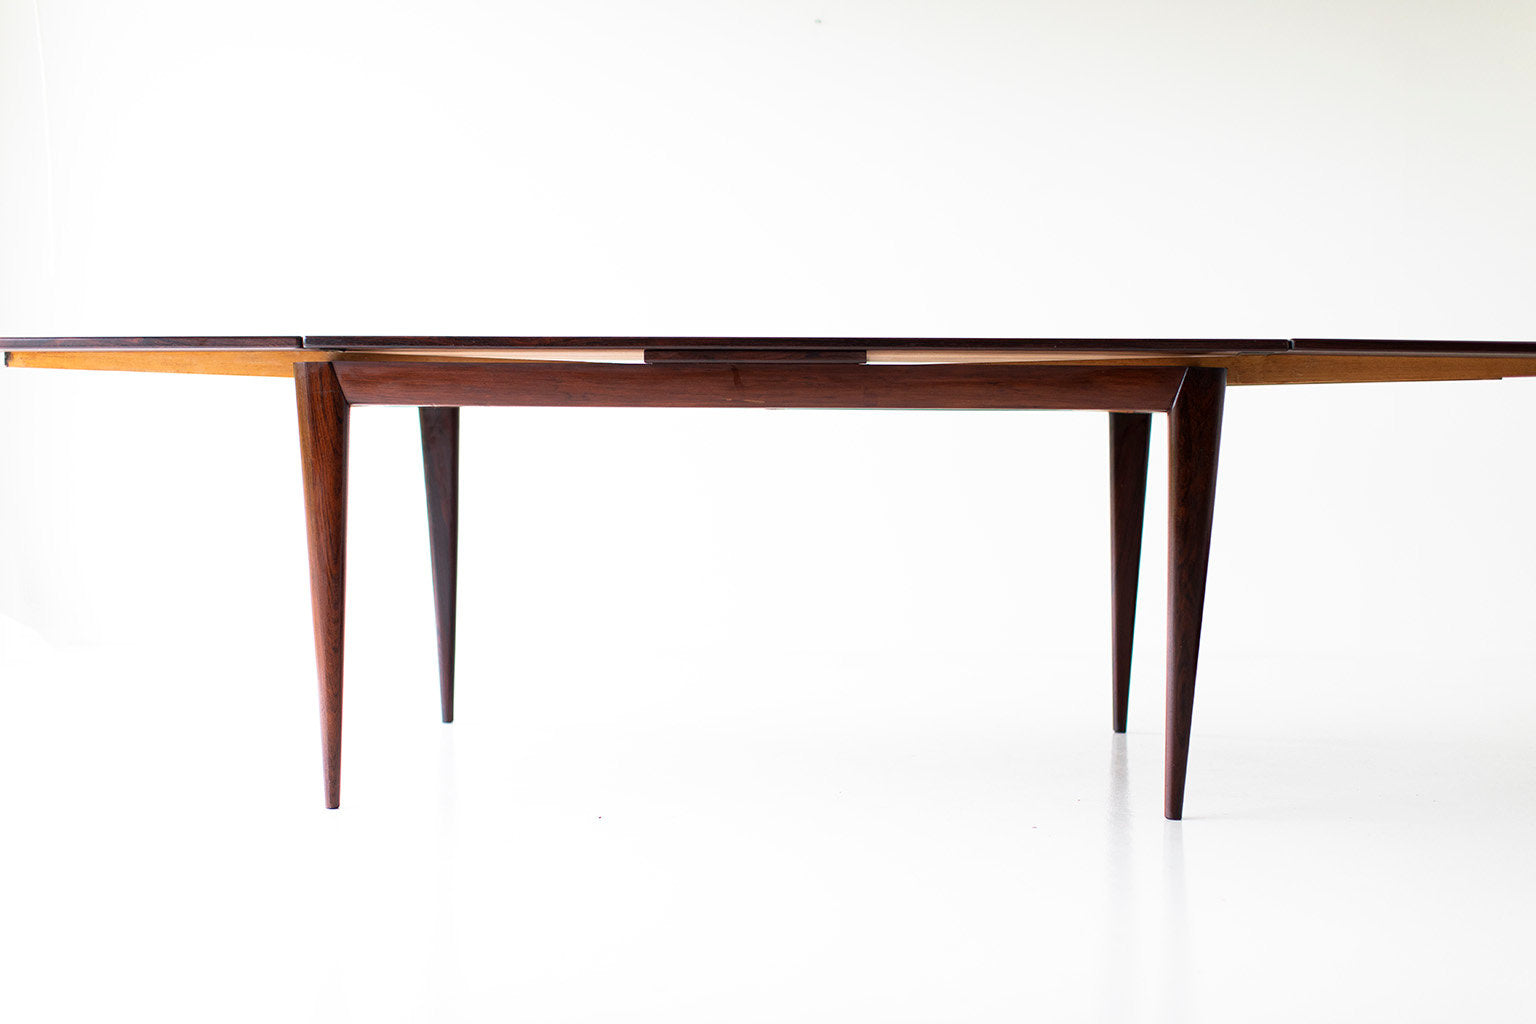 Niels O Moller Rosewood Dining Table - 07061802